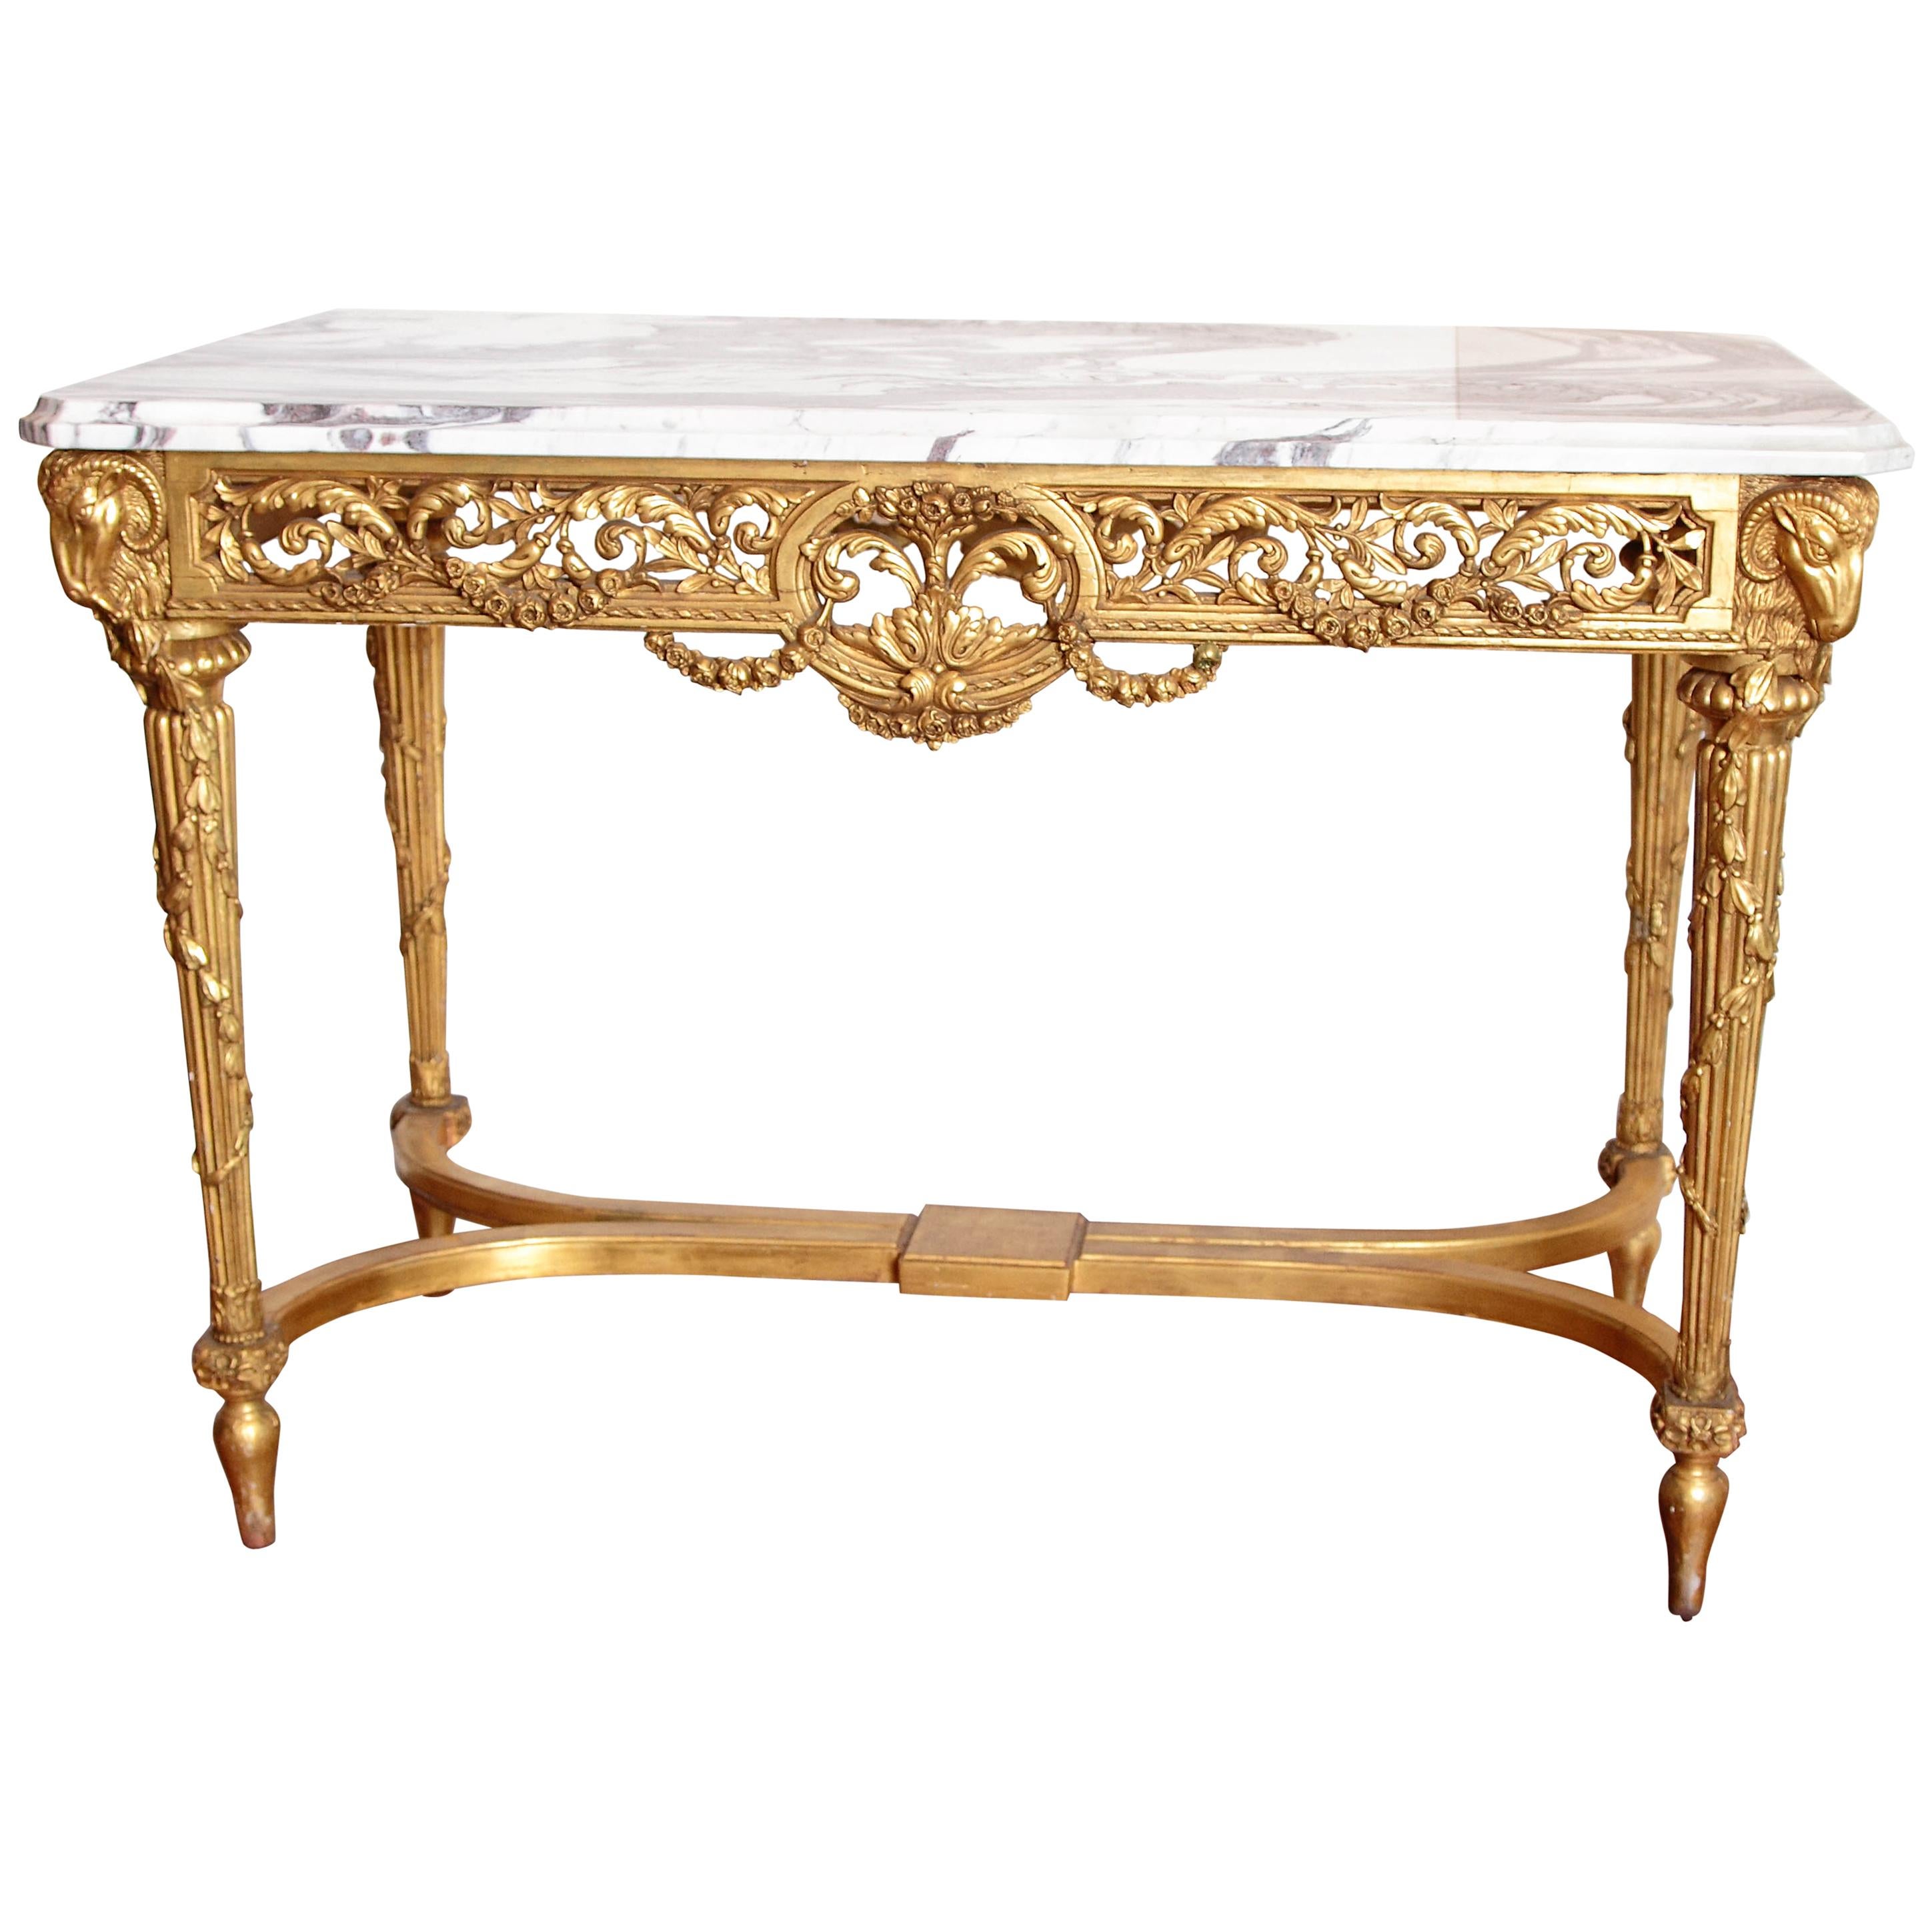 19th Century French Louis XVI Gilt Carved Salon Table